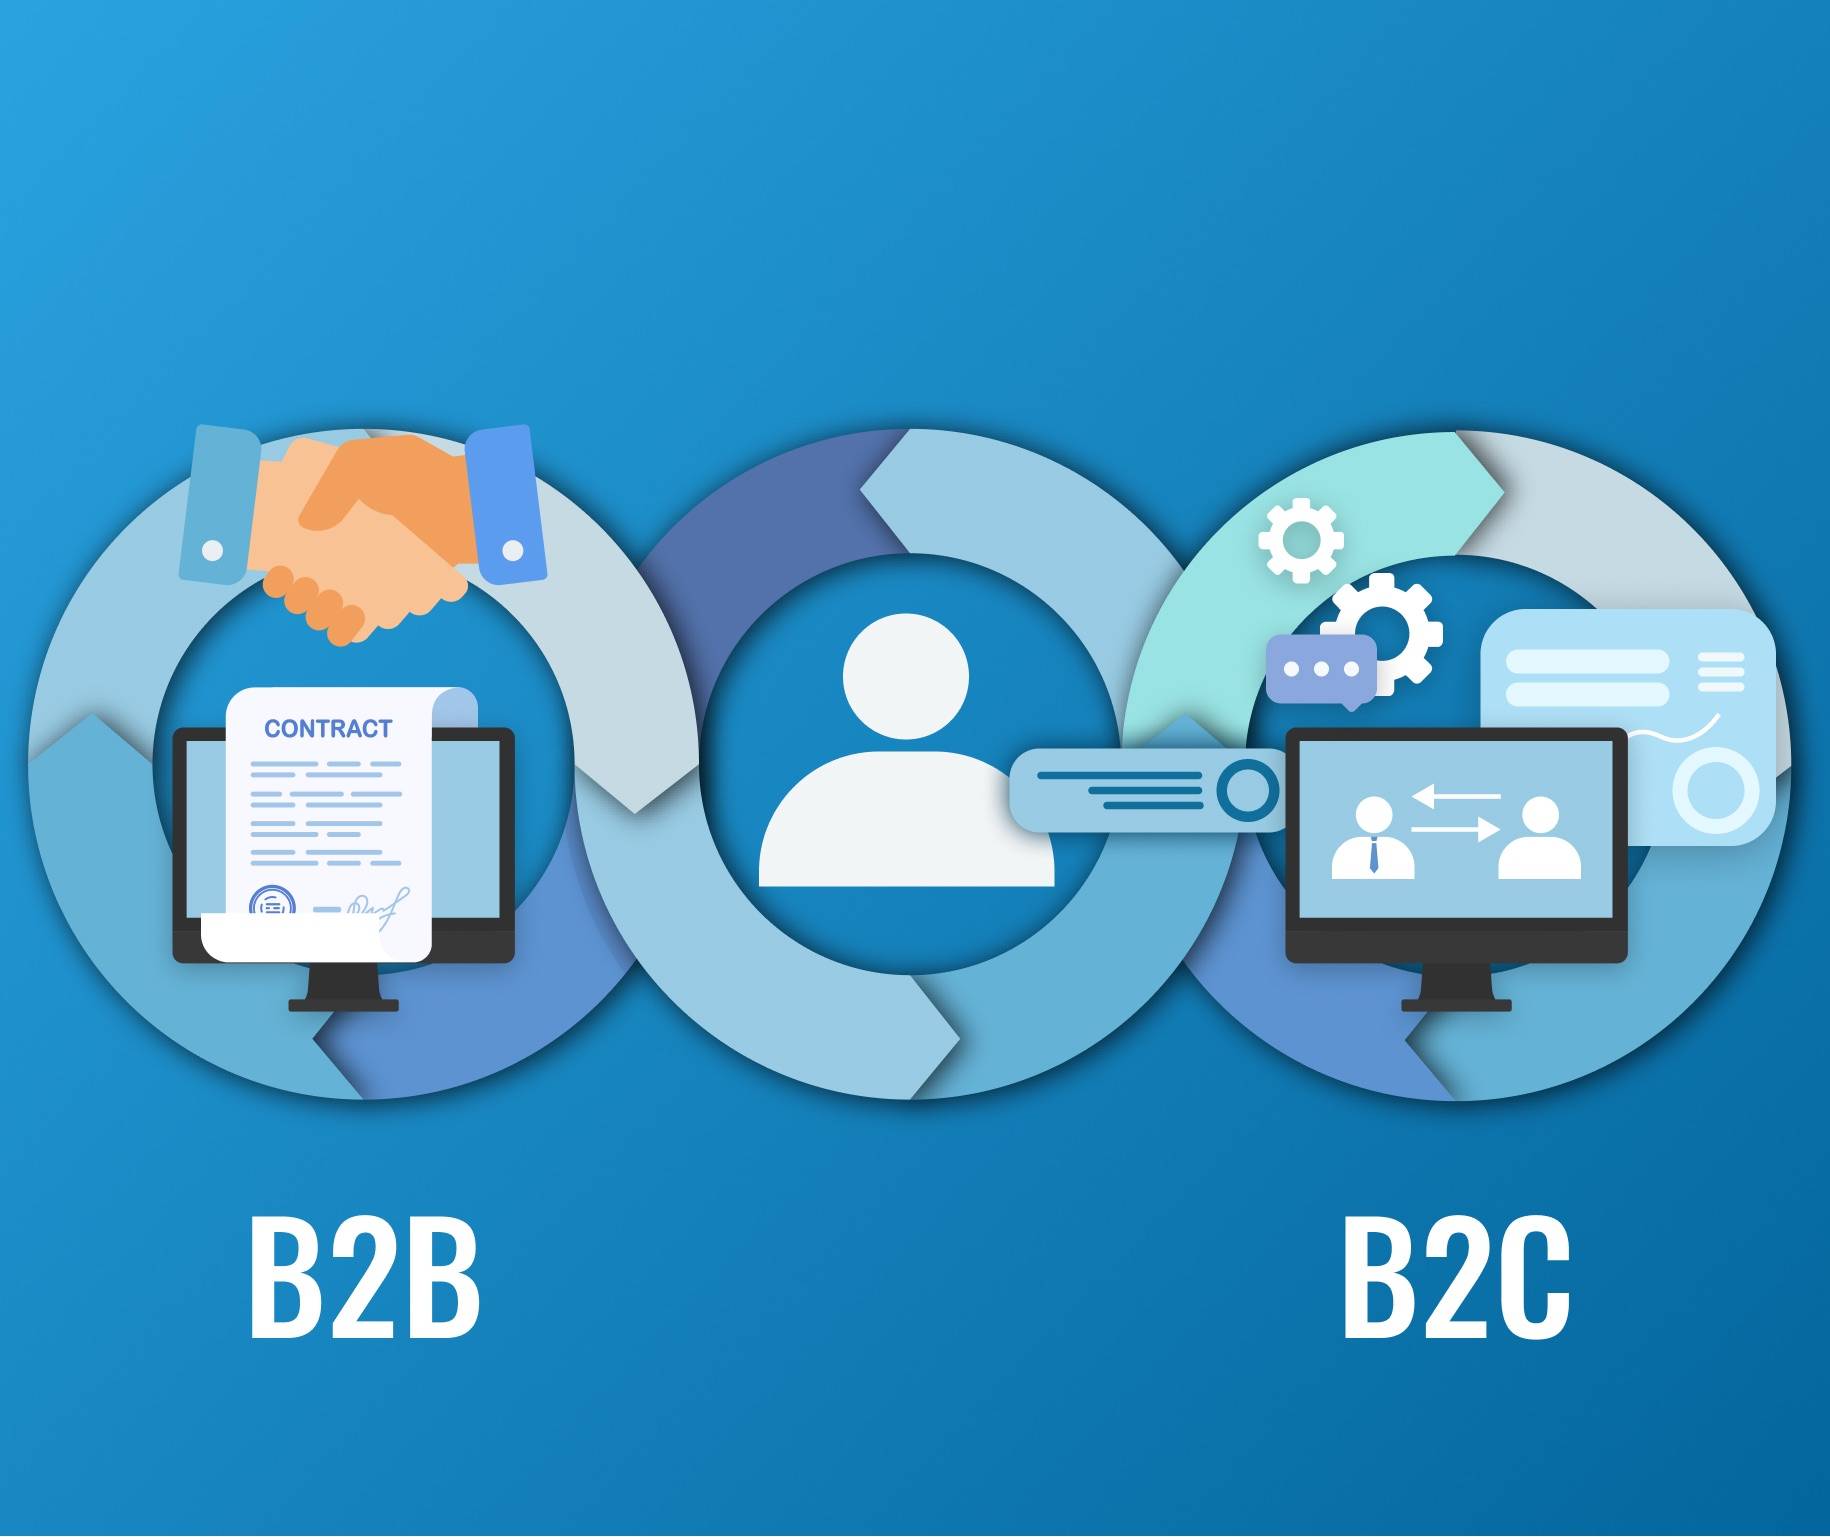 Why self-service portals are a must for B2B2C businesses